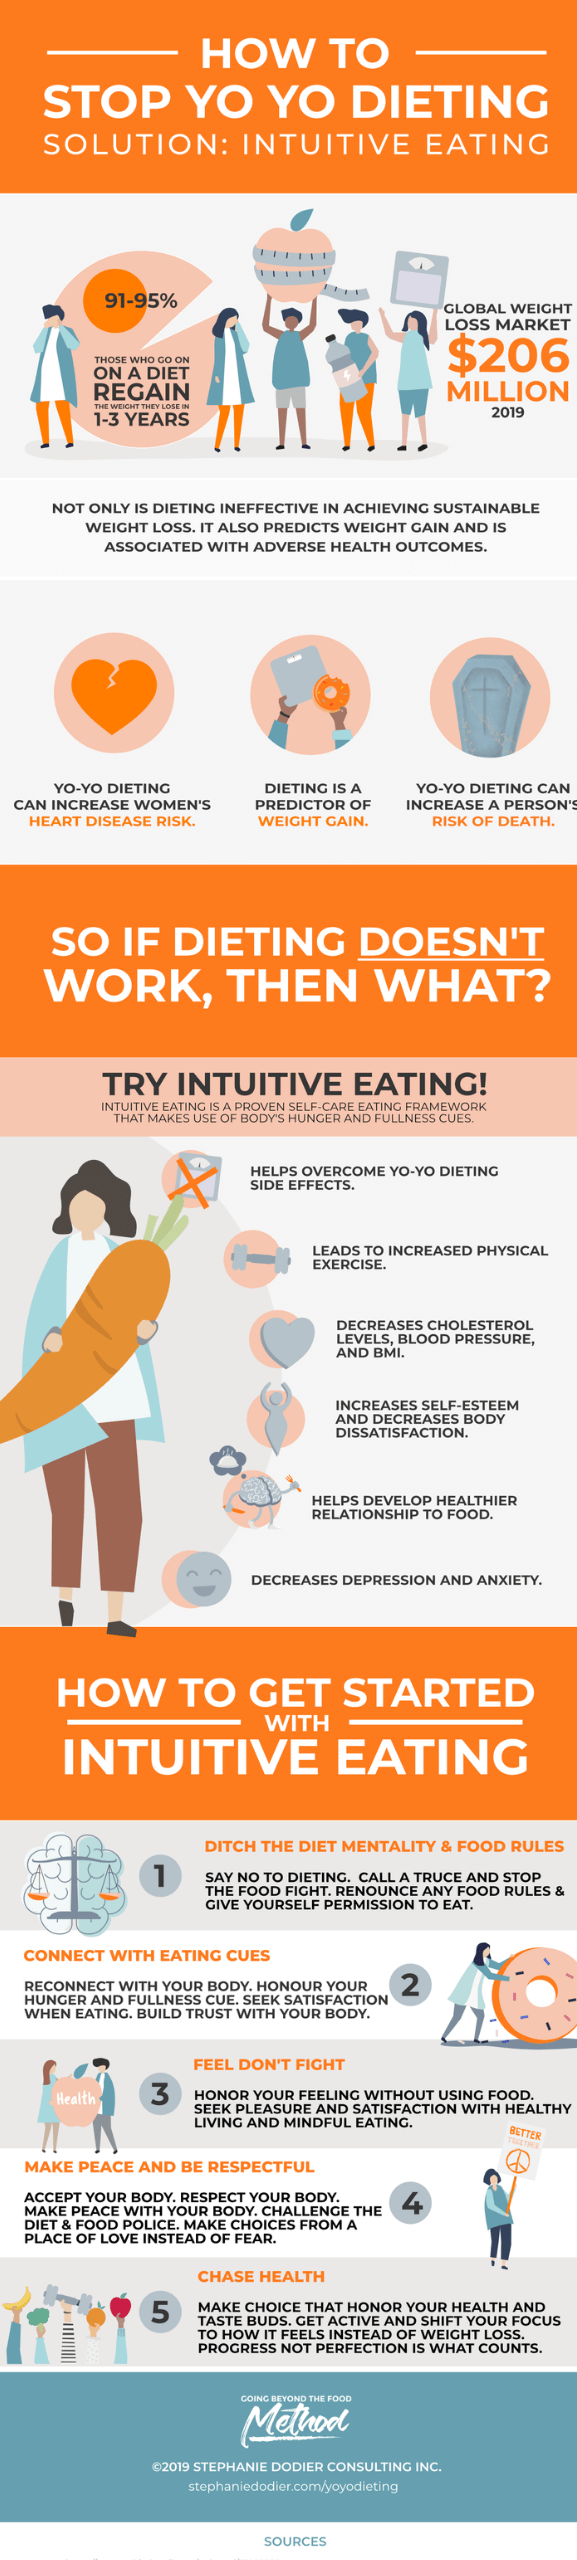 3-intuitive-eating-resources-infographic